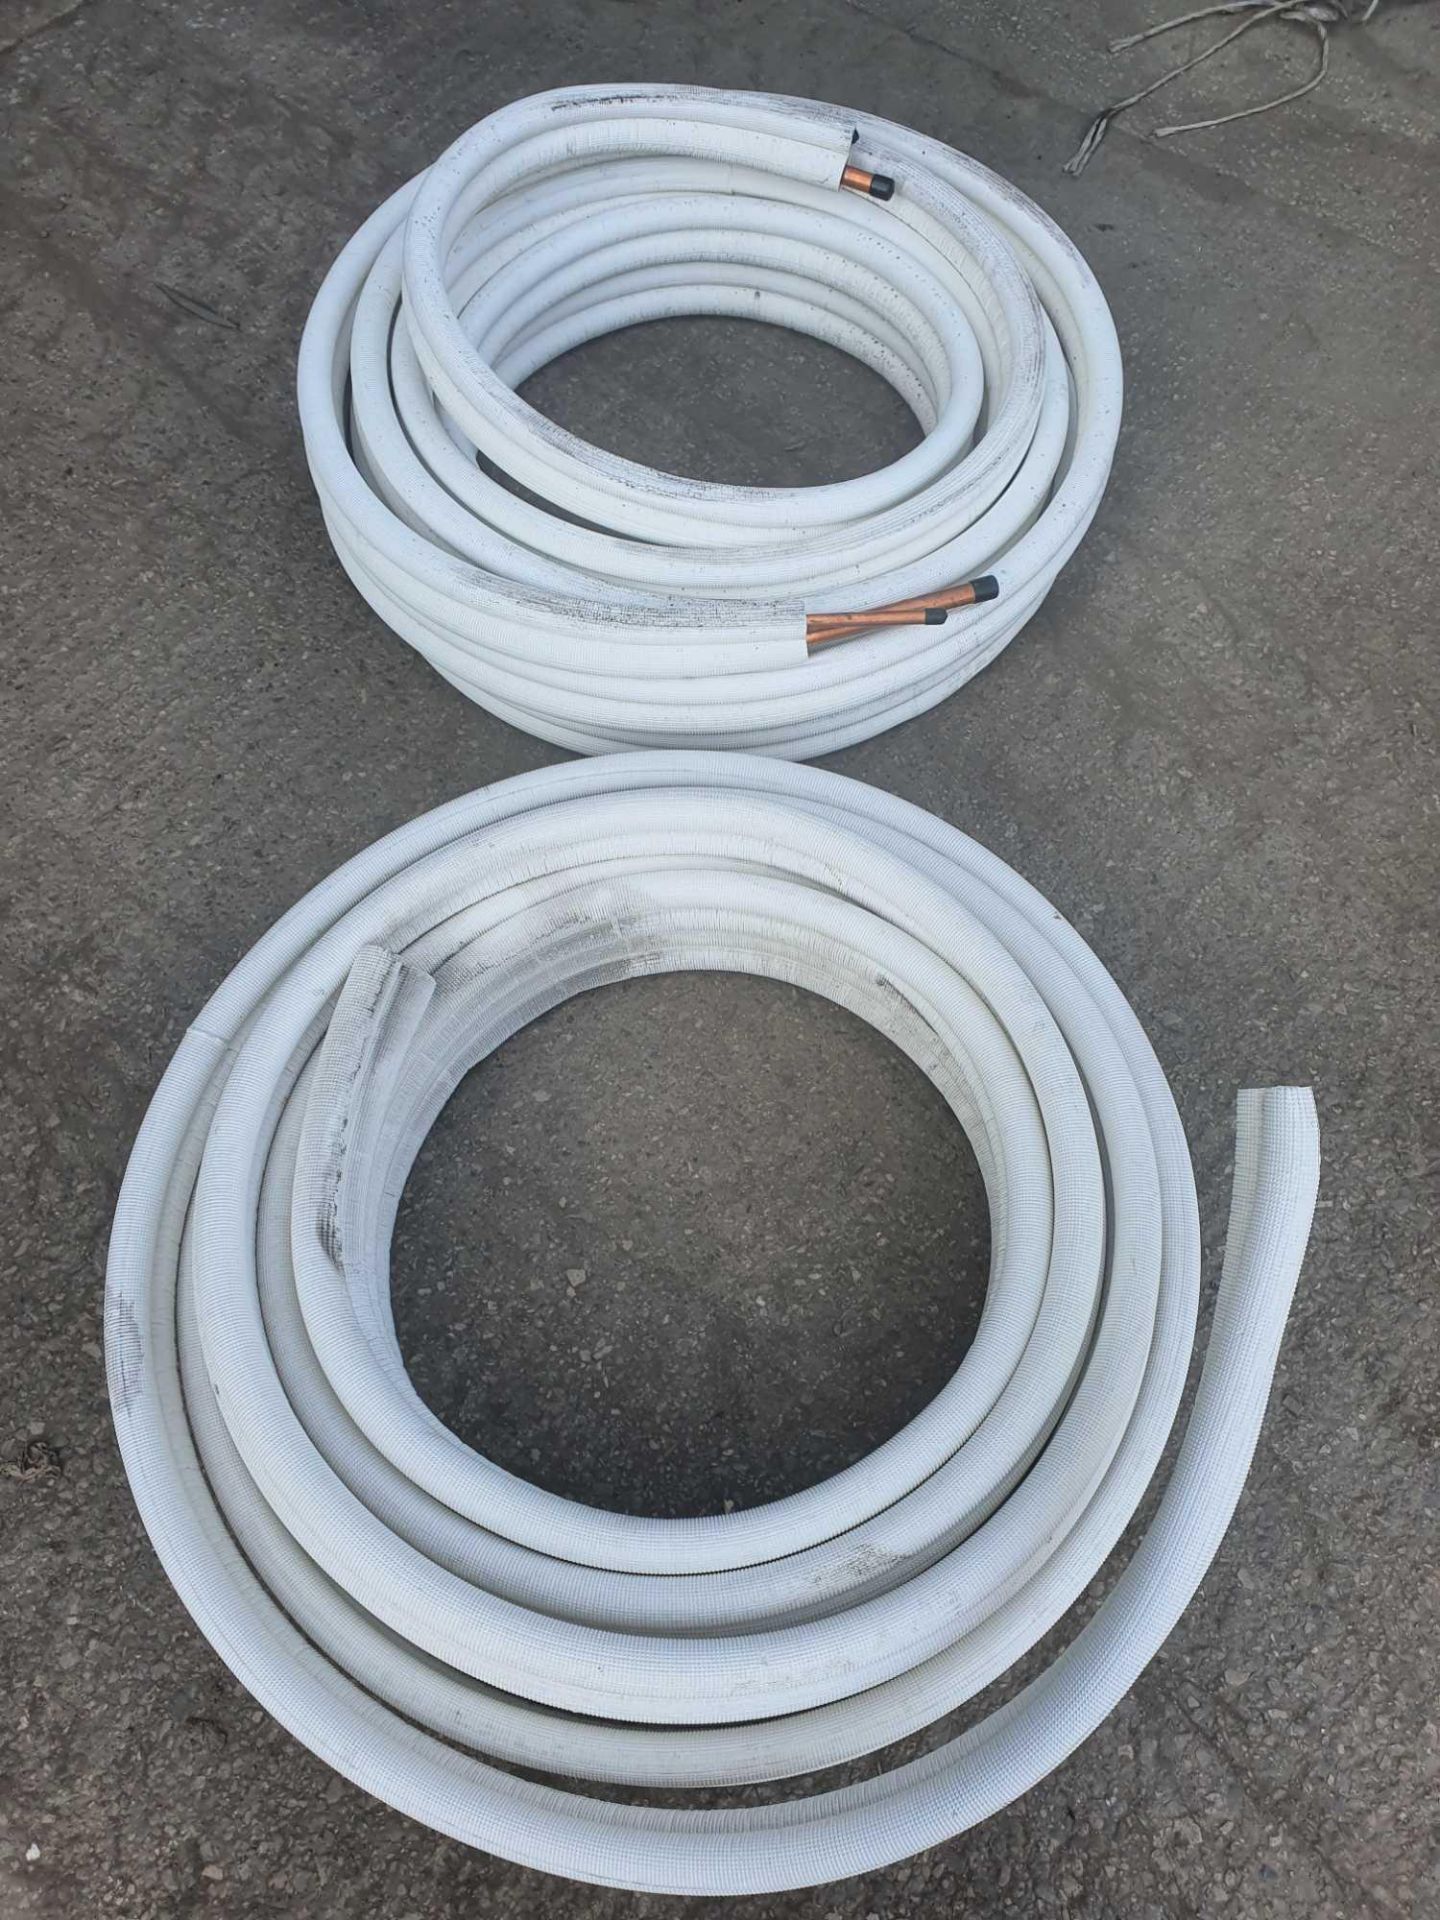 2 x roll of insulated copper pipes